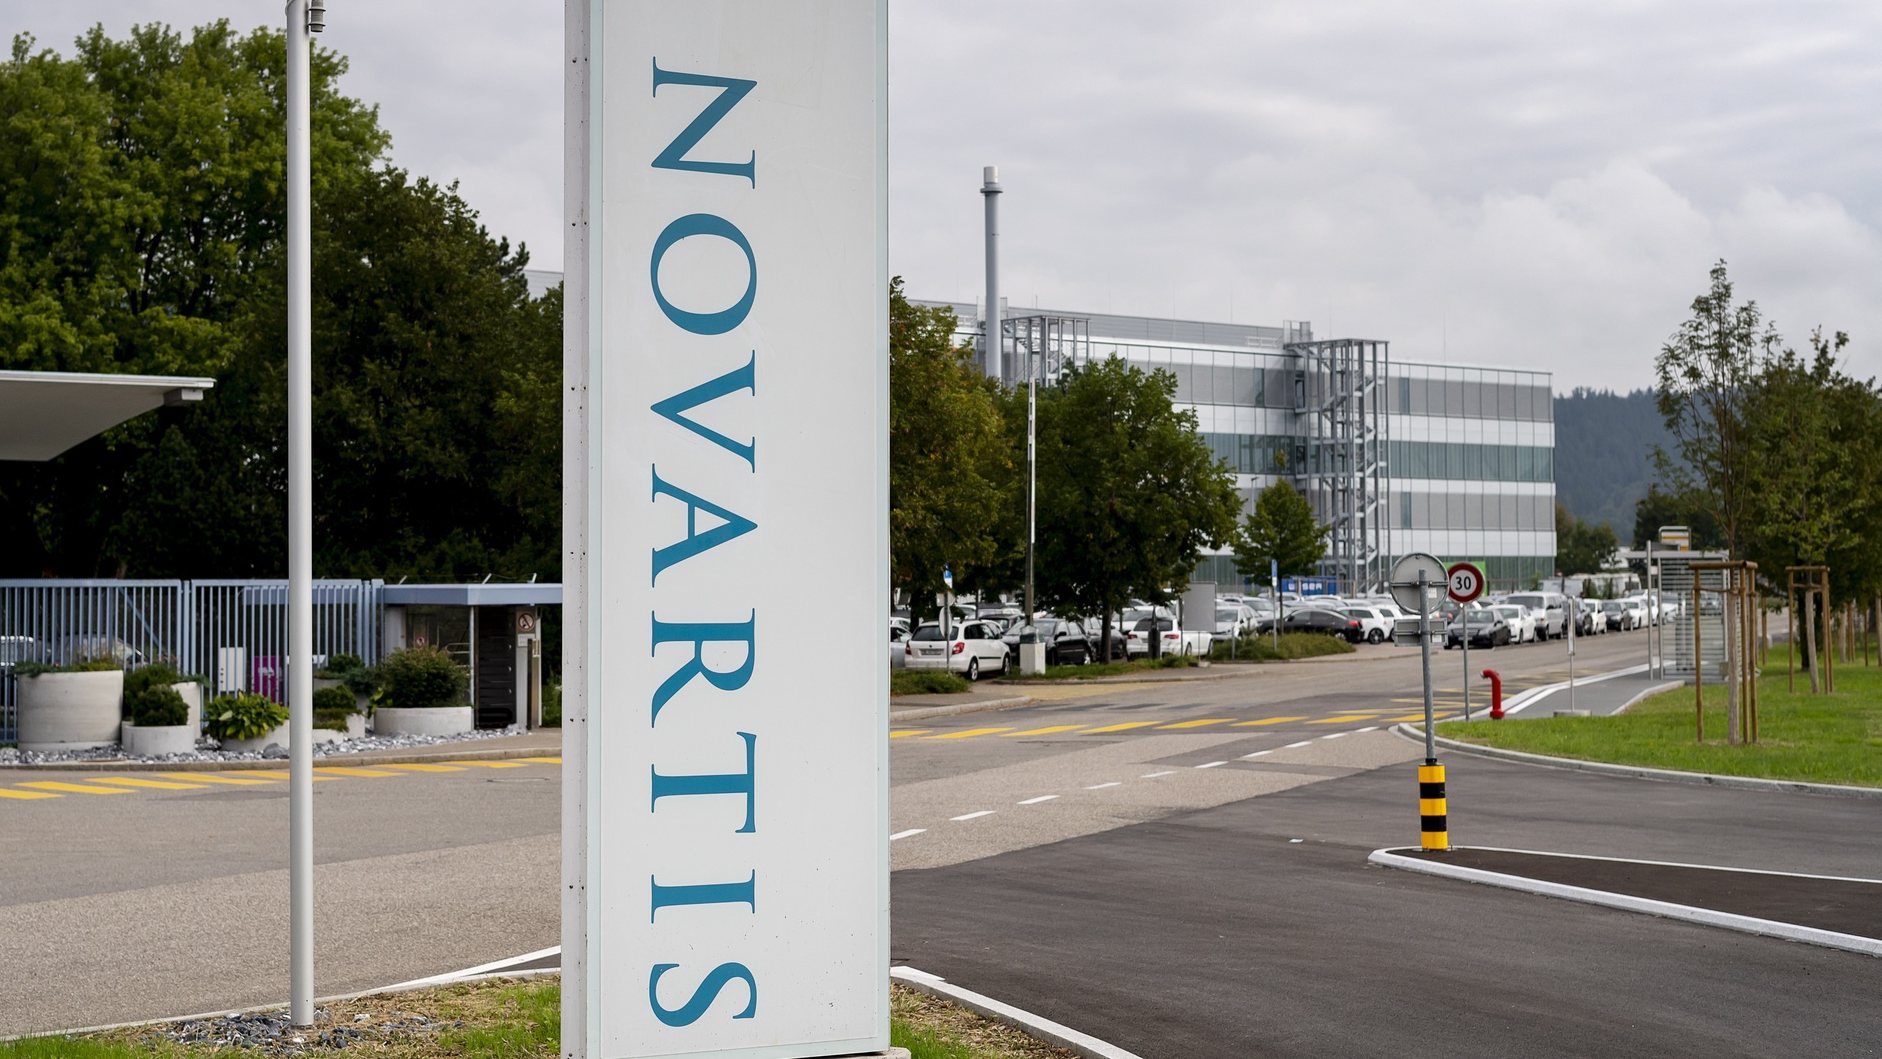 epa08324990 (FILE) - The Novartis logo is pictured in Stein, Switzerland, 03 September 2019 (reissued 26 March 2020). On 26 March 2020, Basel-based pharmaceutical giant Novartis announced to have joined forces with the Bill &amp; Melinda Gates Foundation to fight the coronavirus pandemic.  EPA/GEORGIOS KEFALAS